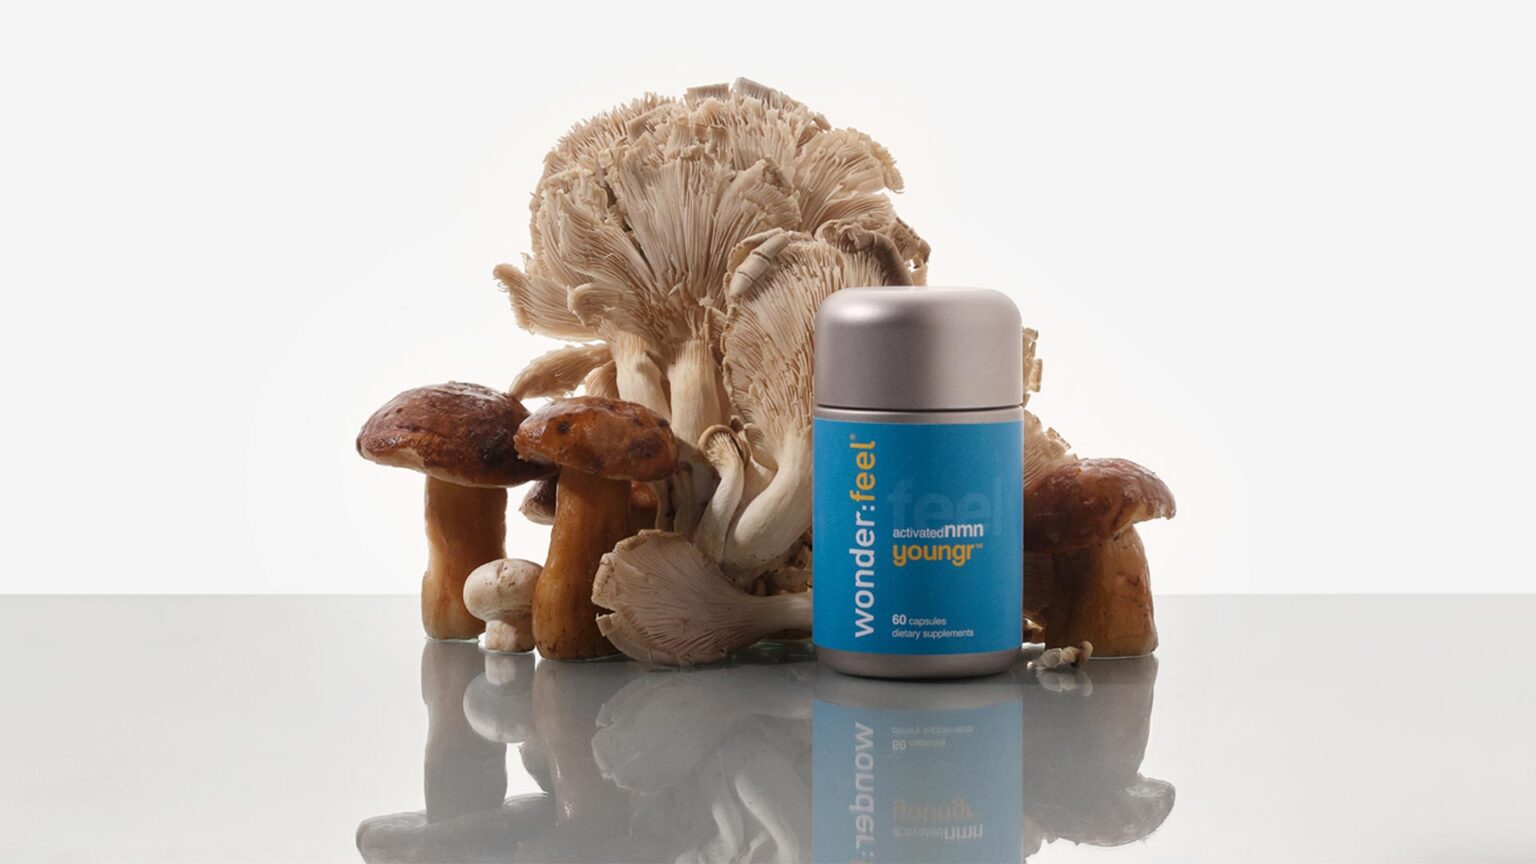 Wonderfeel Youngr bottle with fresh lions mane and porcini mushrooms, the source of ergothioneine.